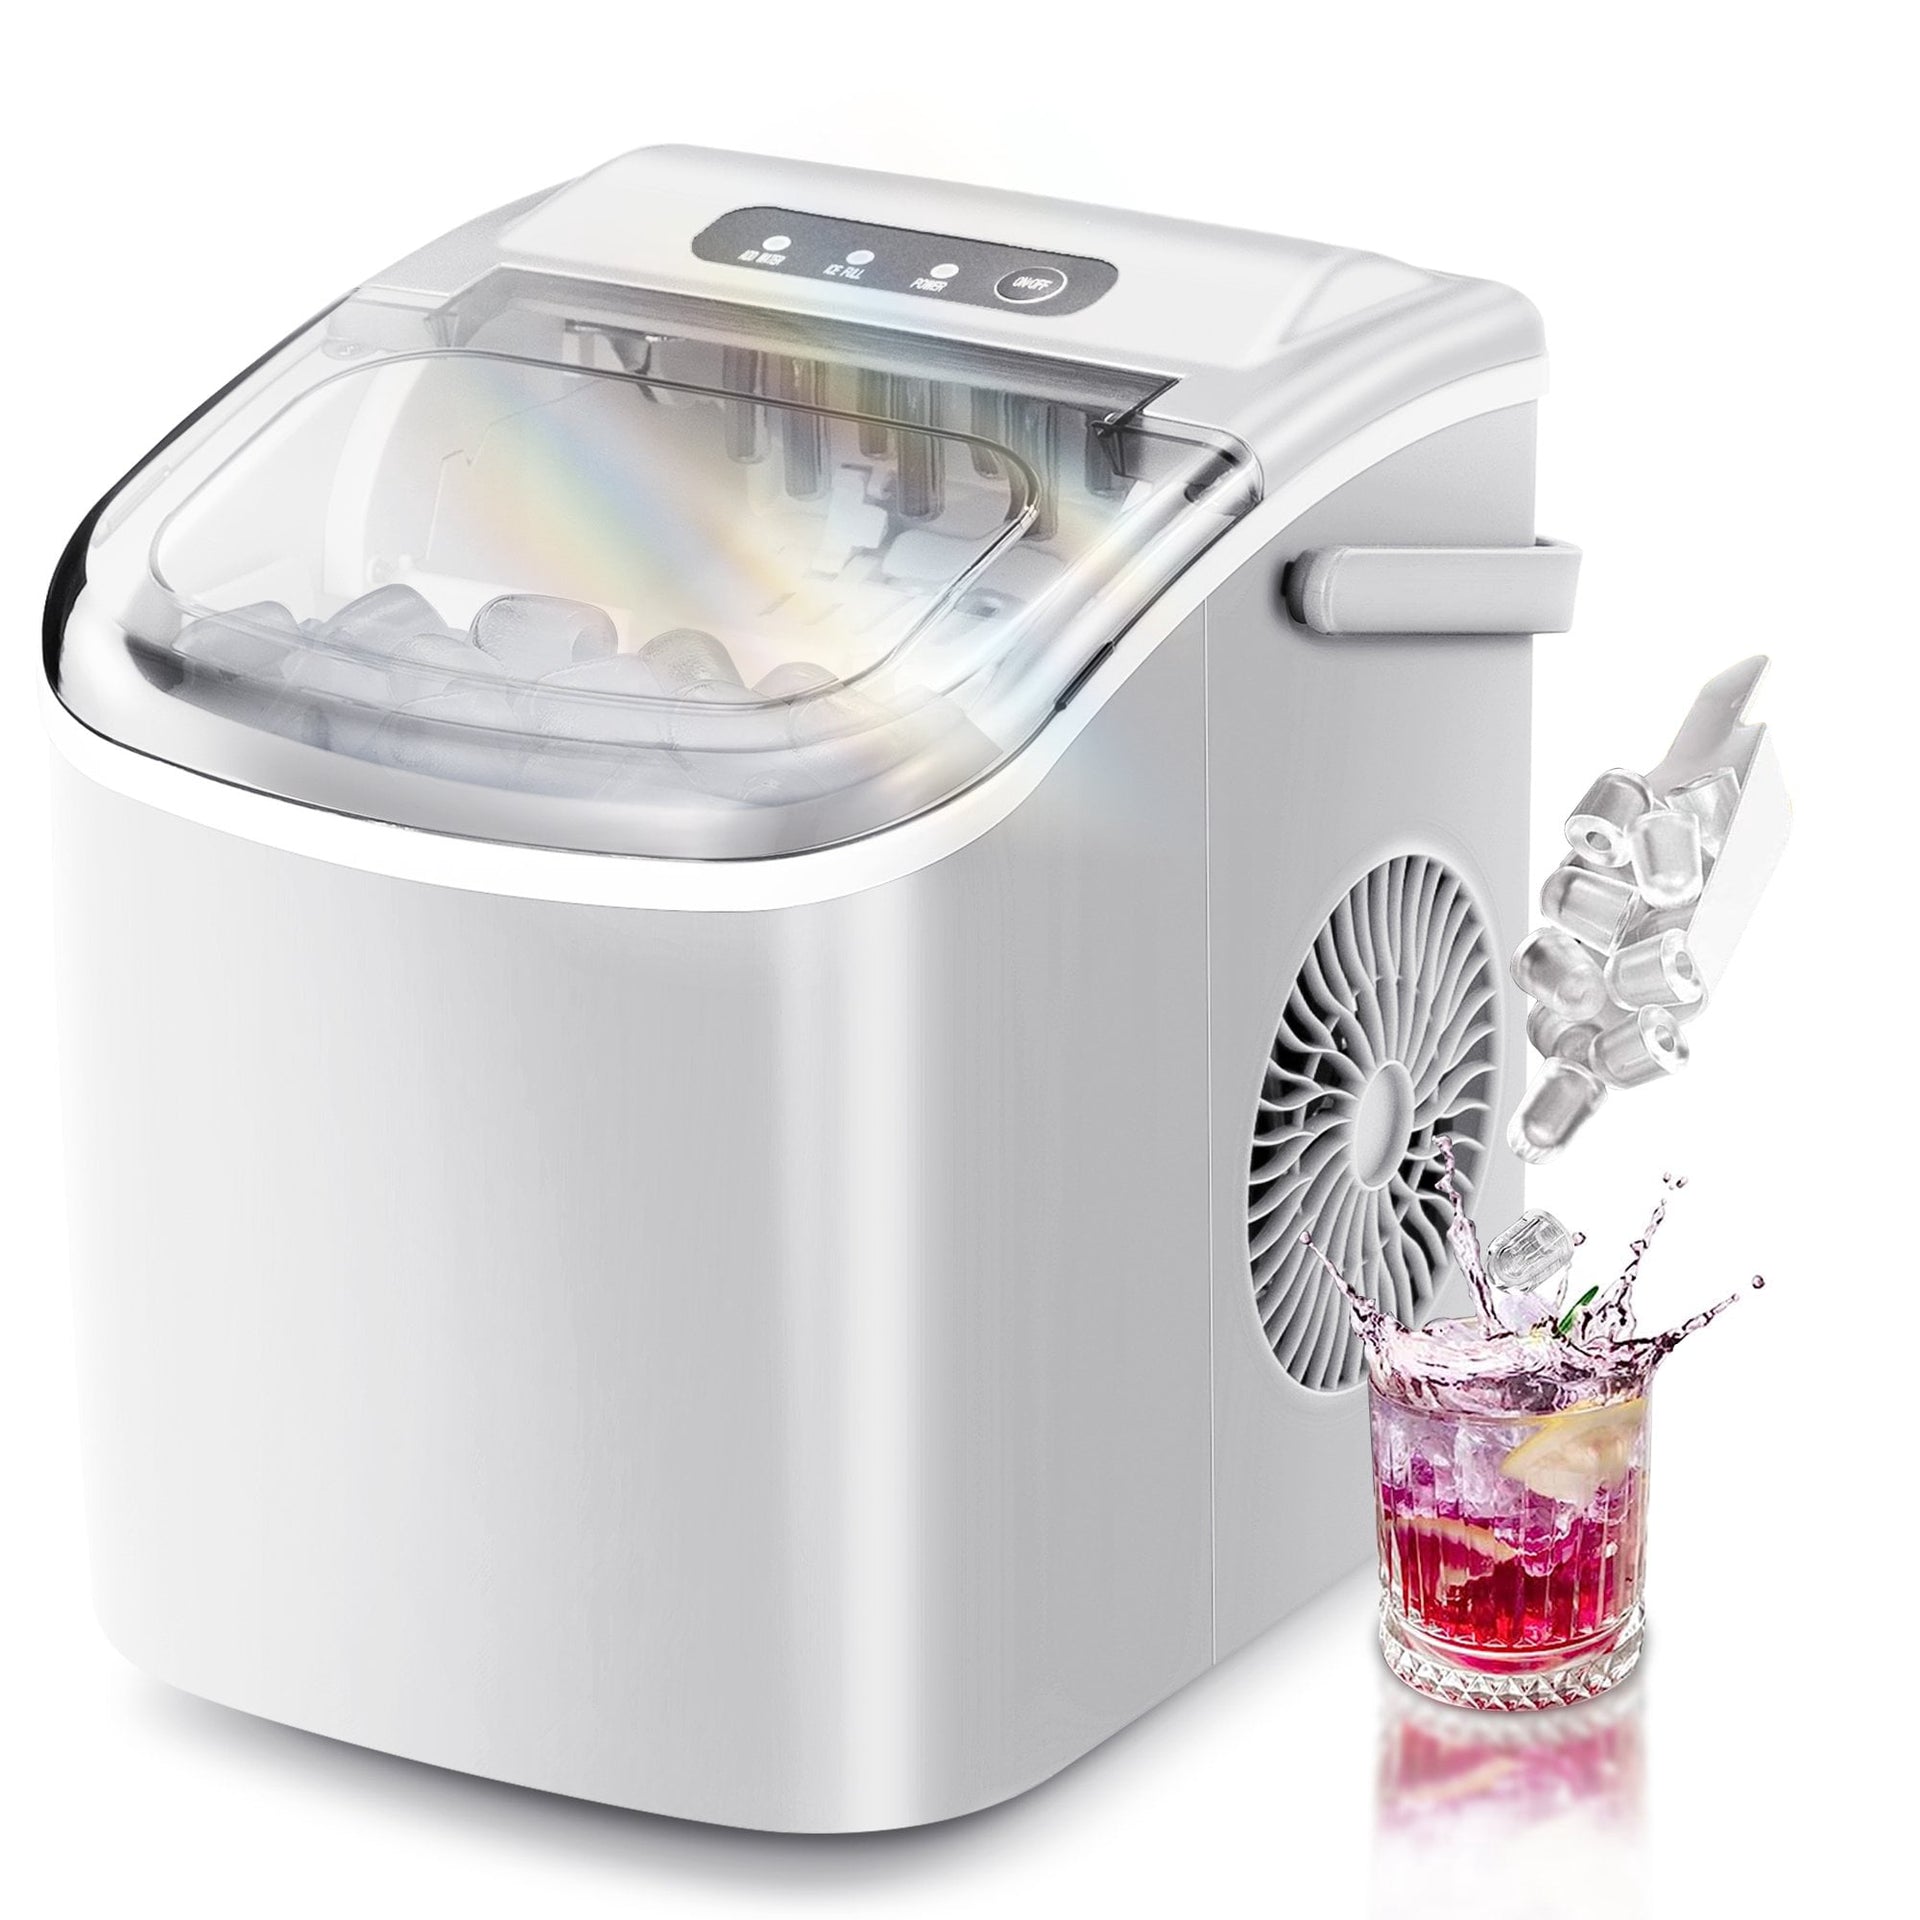 Ice Makers Countertop, Portable Ice Maker Machine with Handle